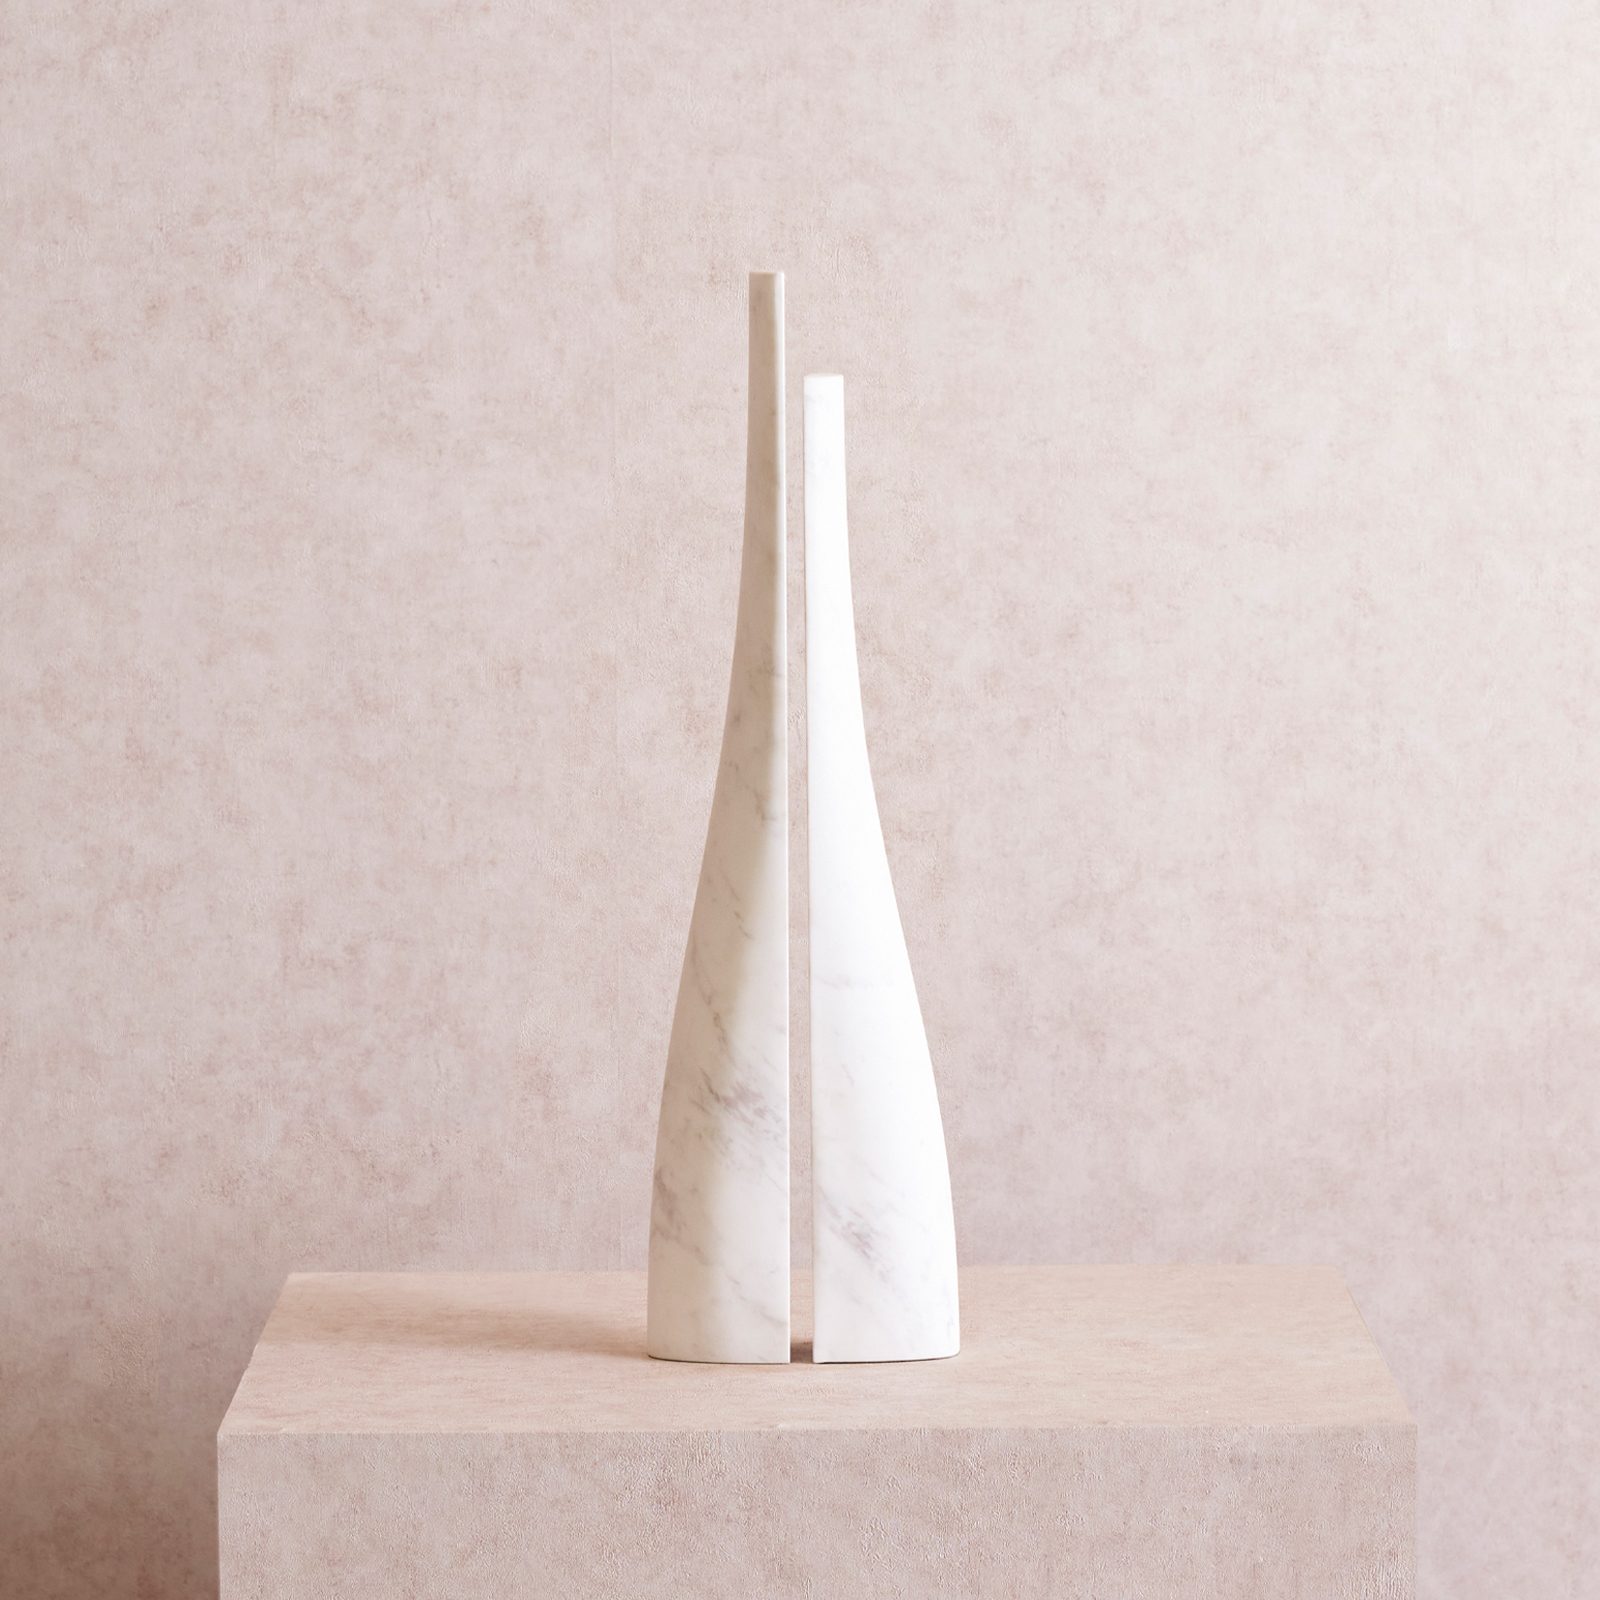 Static Unity I Sculpture white marble_Veronica Mar_1600 x 1600_3